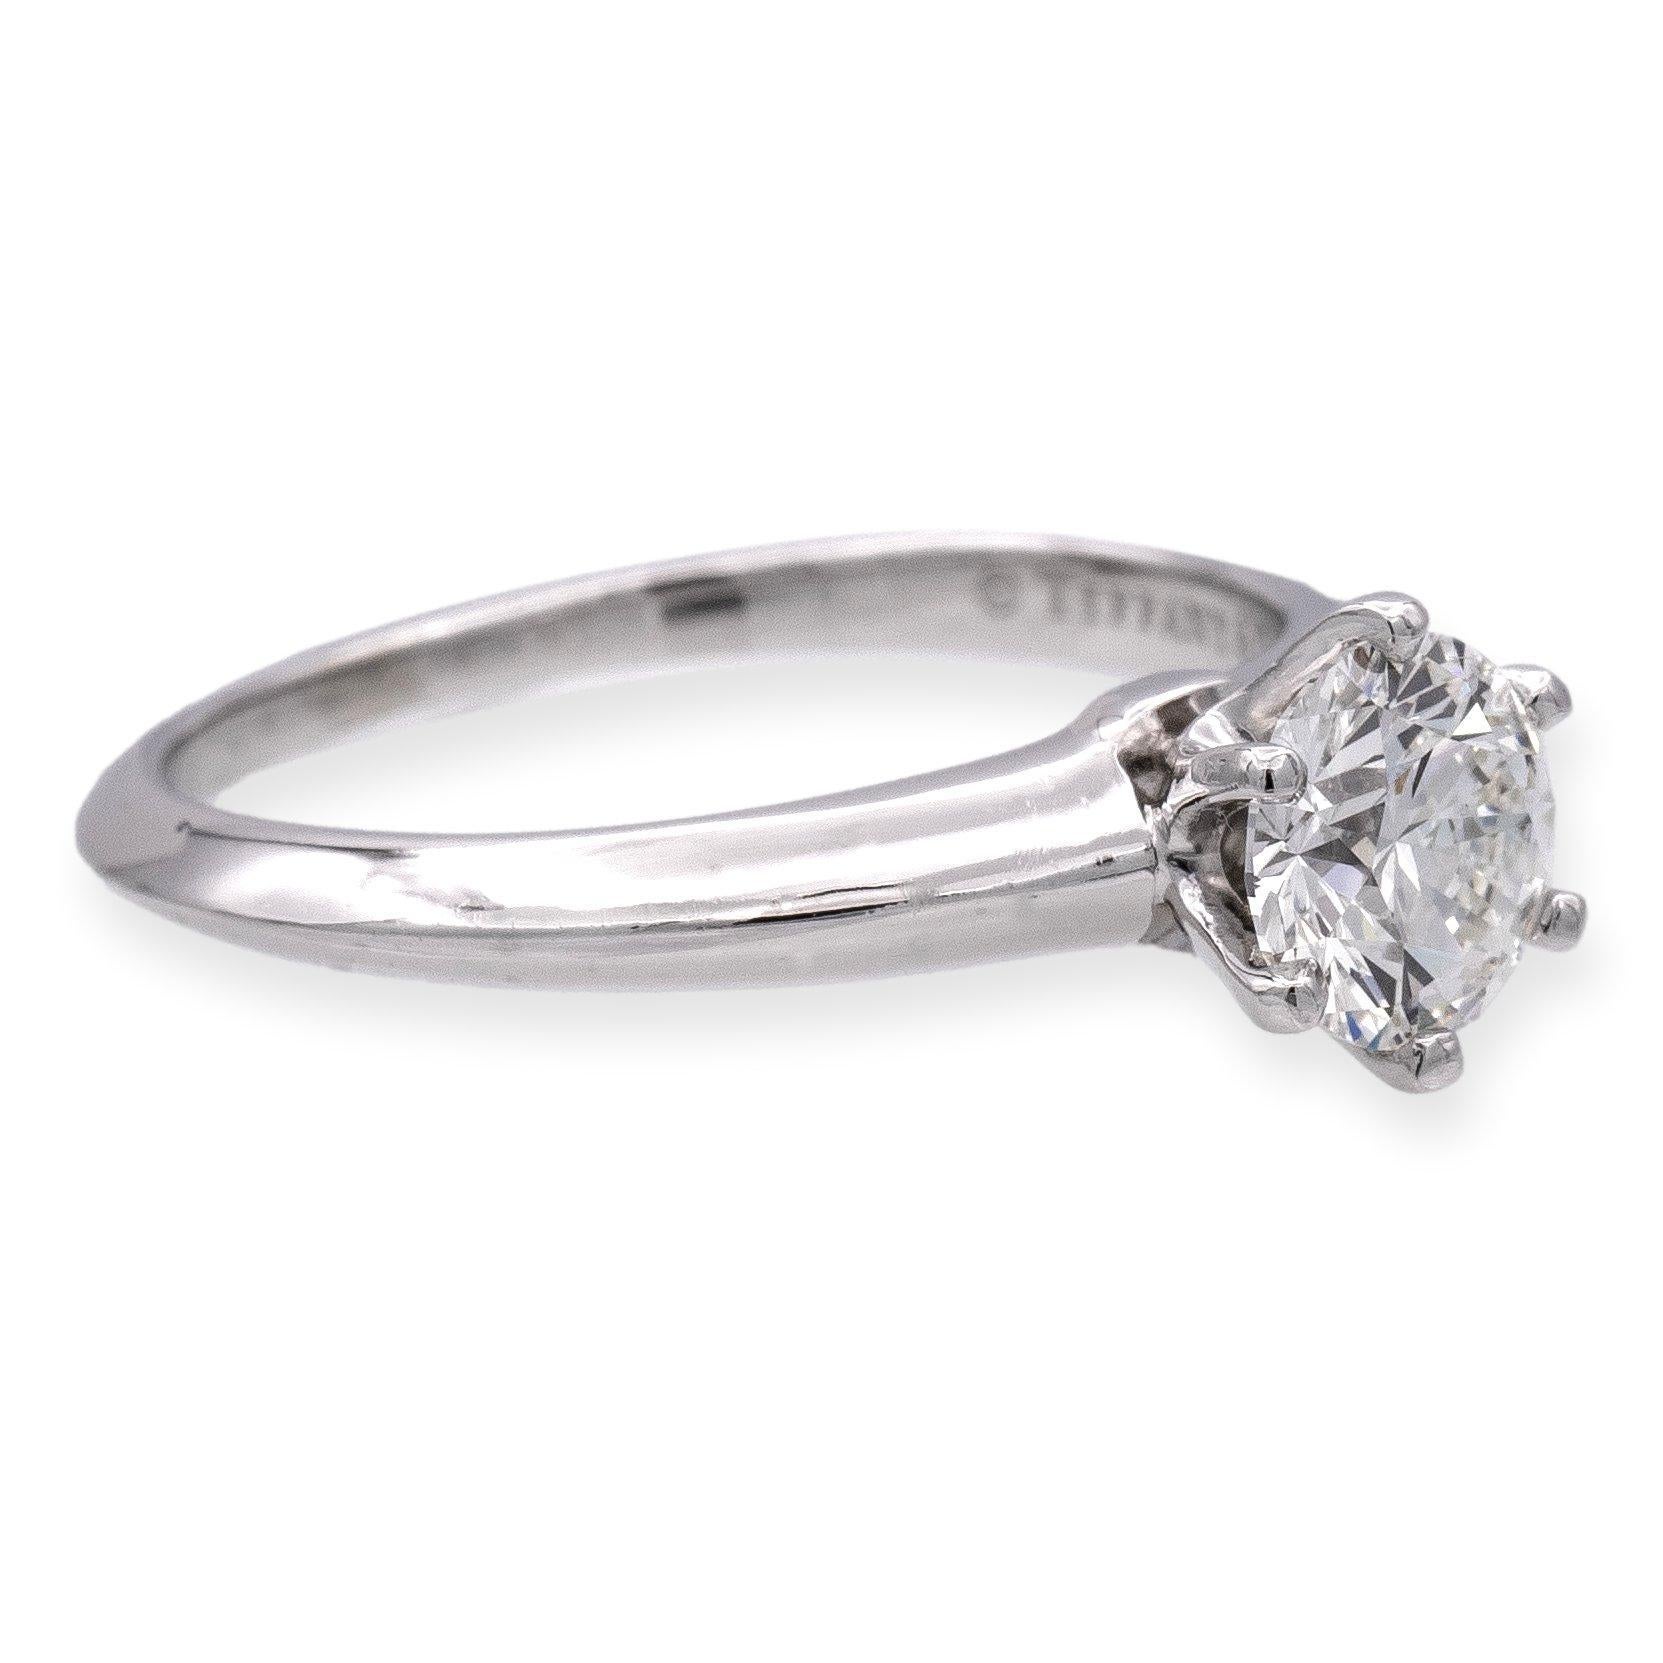 Tiffany & Co. Diamond Engagement Ring featuring a stunning .78ct round cut brilliant diamond, graded F color and VS1 clarity, crafted in a platinum setting. Exuding every detail to perfection, from the flawless stone to the elegant craftsmanship.